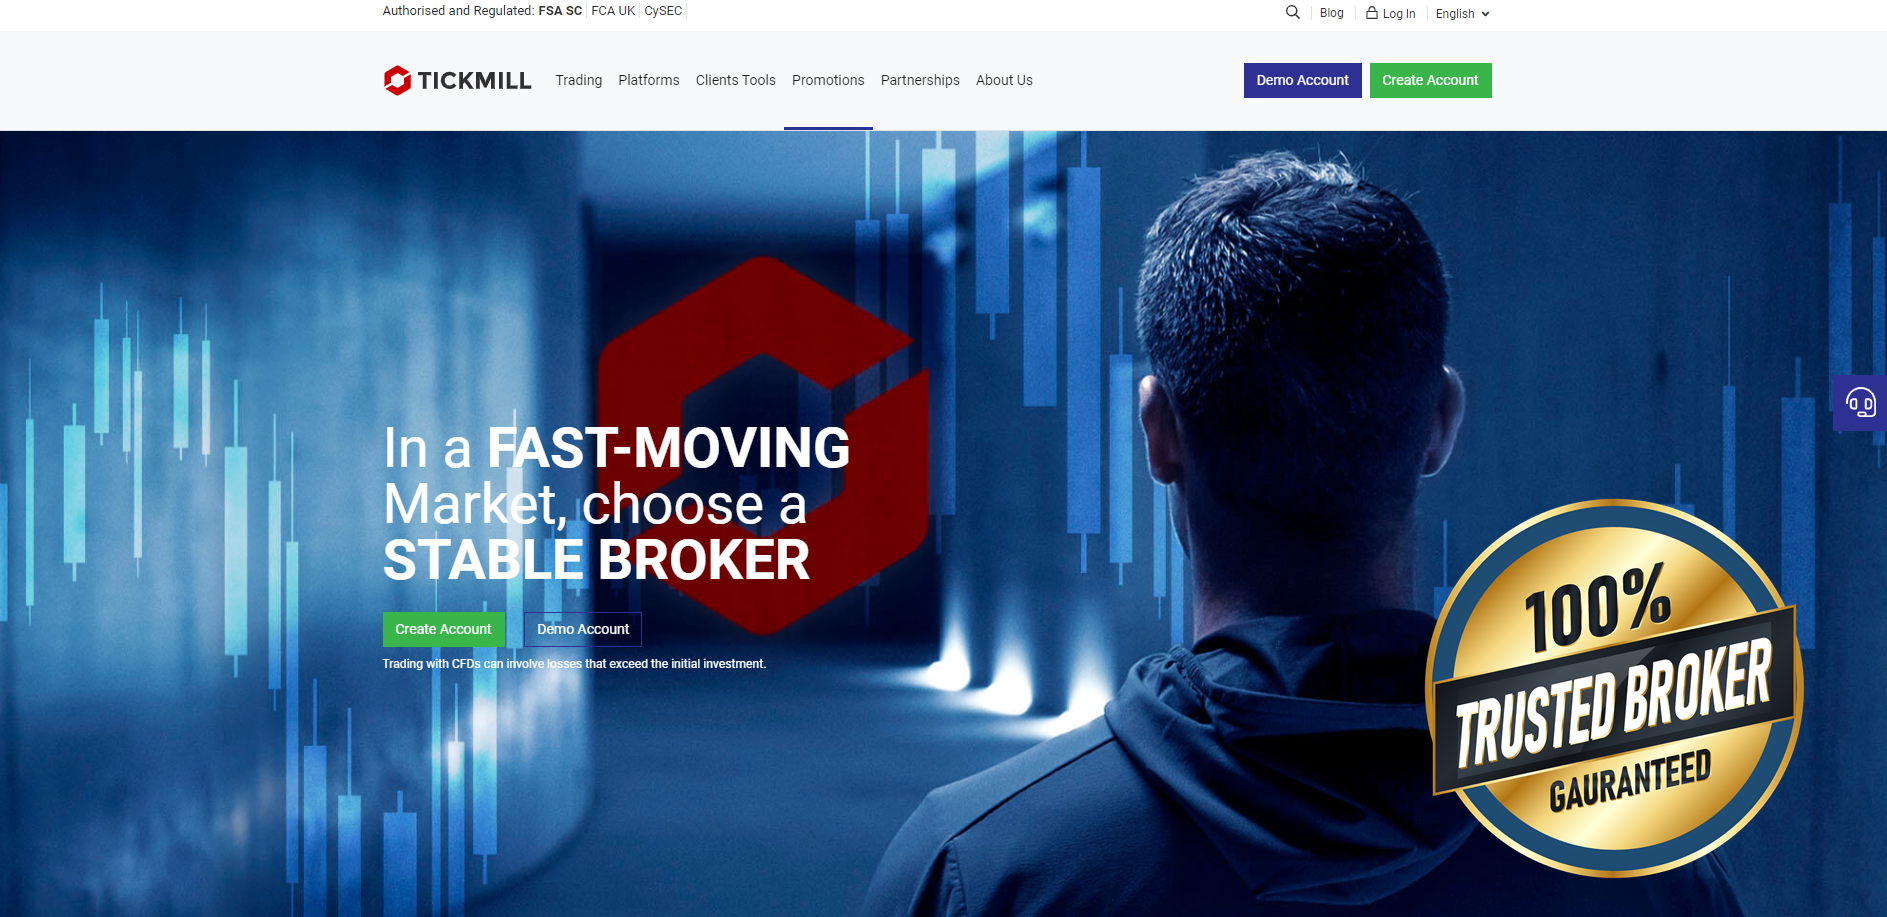 The official website of the forex broker Tickmill

